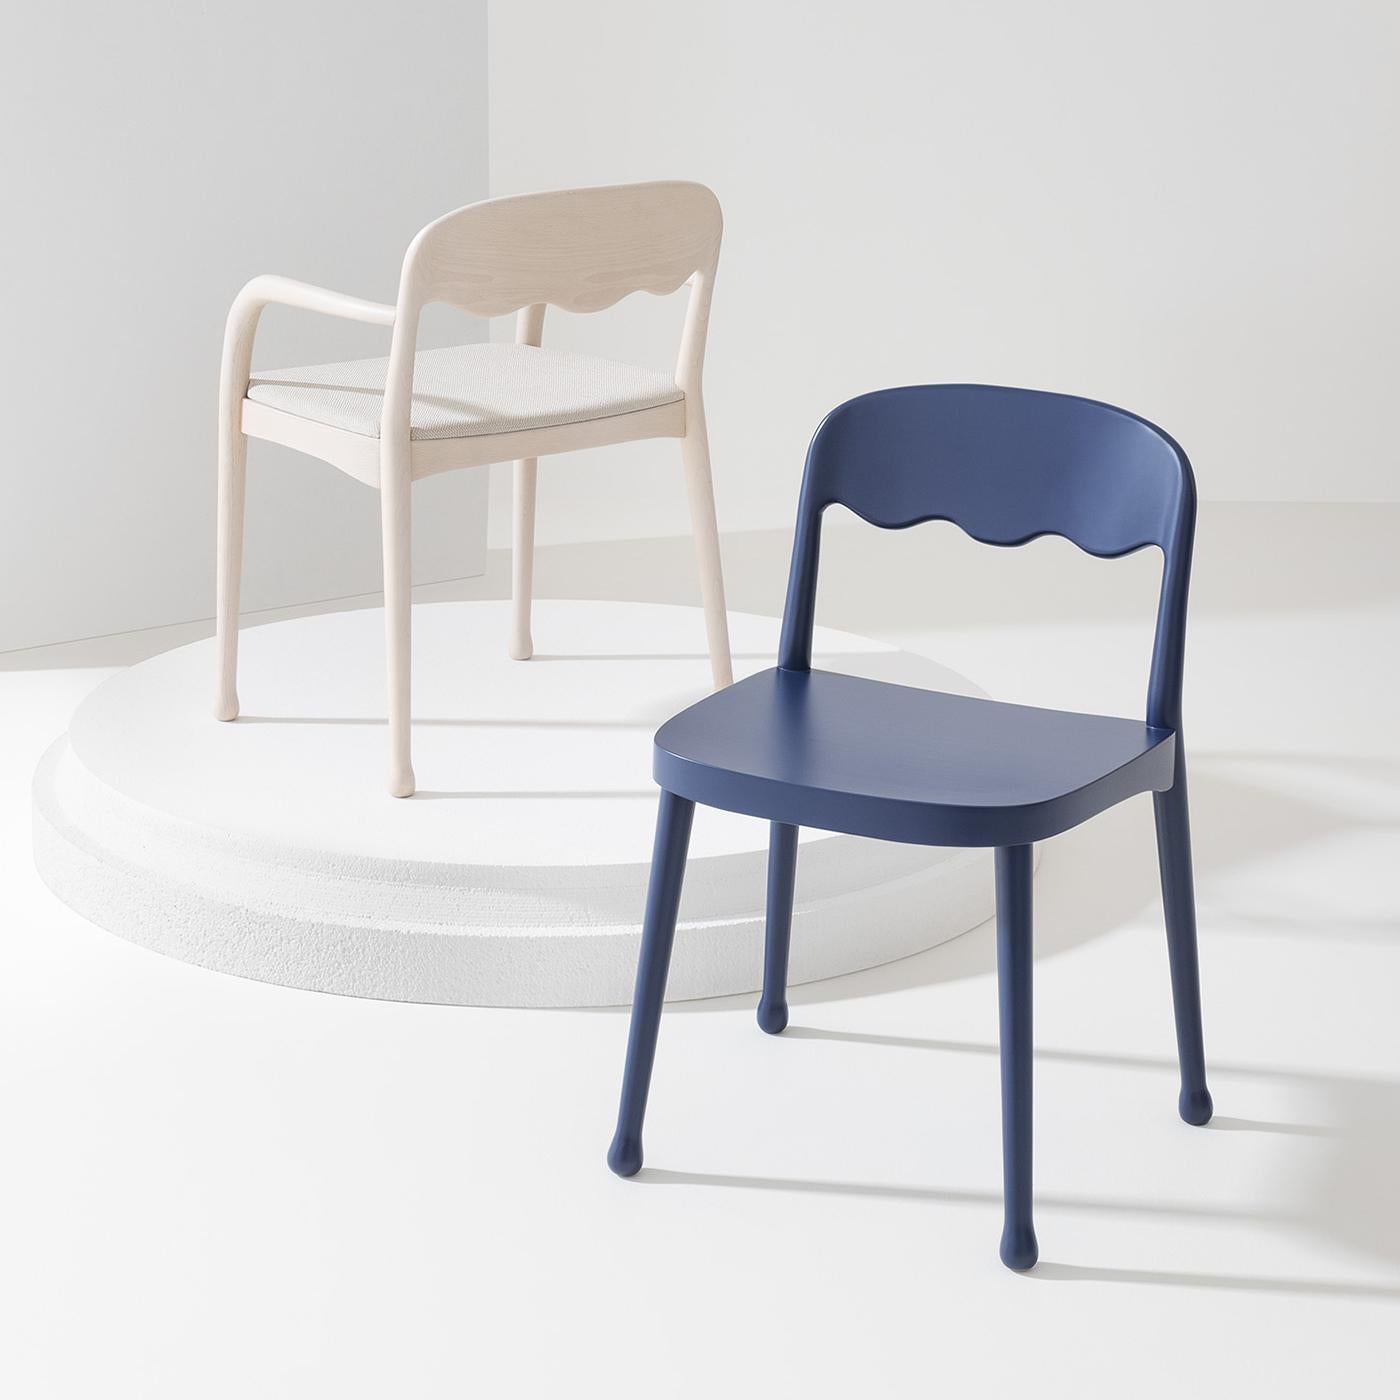 Simple yet elegant, this exquisite design by Cristina Celestino will add a lively and charming accent to a modern decor. Fashioned of solid beechwood with a matte blue finish, it features a large and welcoming seat embellished with a superb open and